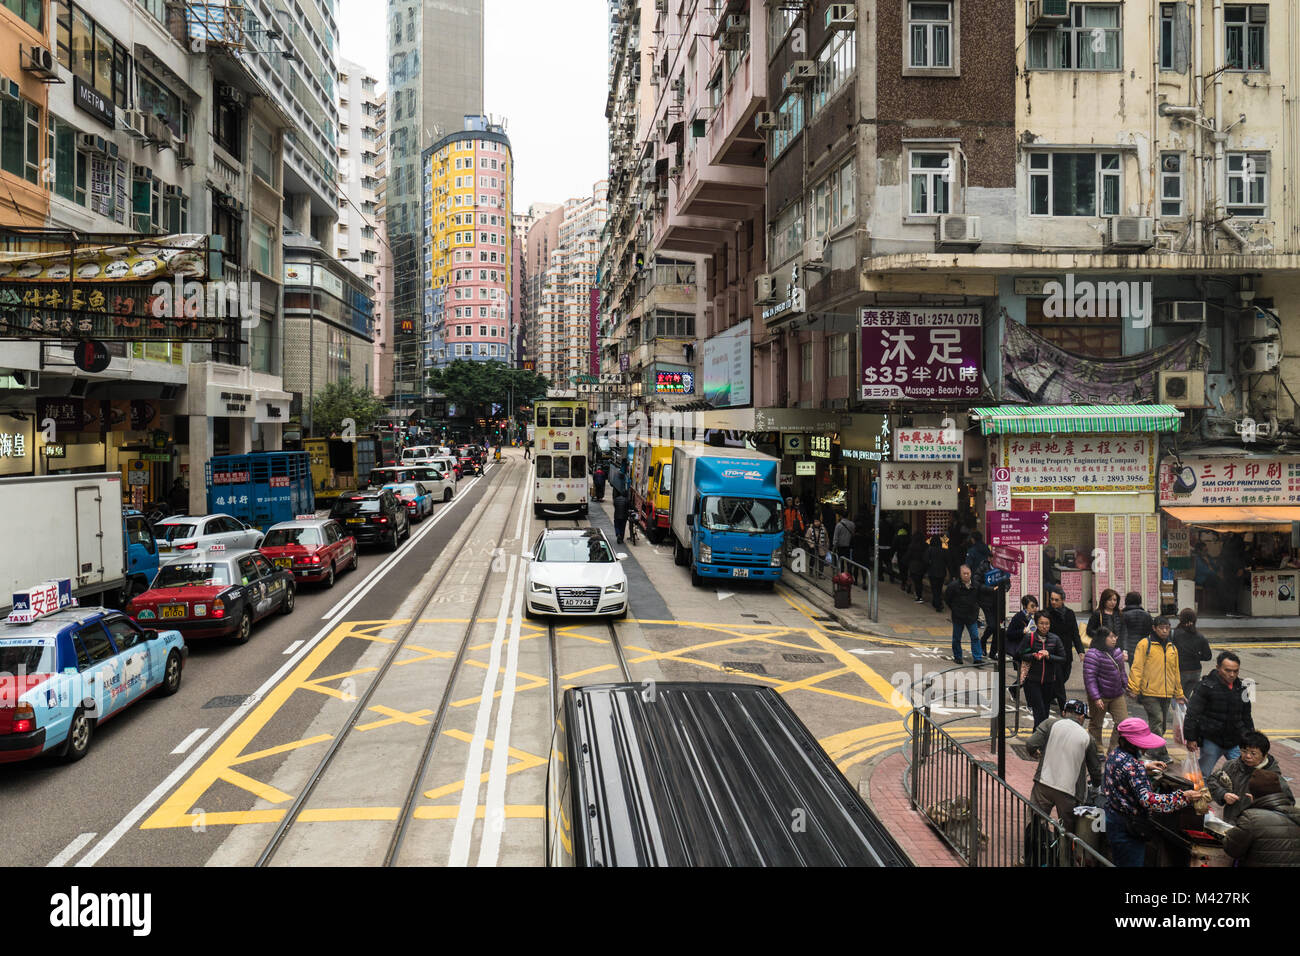 Hong Kong - February 2 2018: Traffic and tramway car drive in the crowded street of the Wanchai district in Hong Kong island Stock Photo